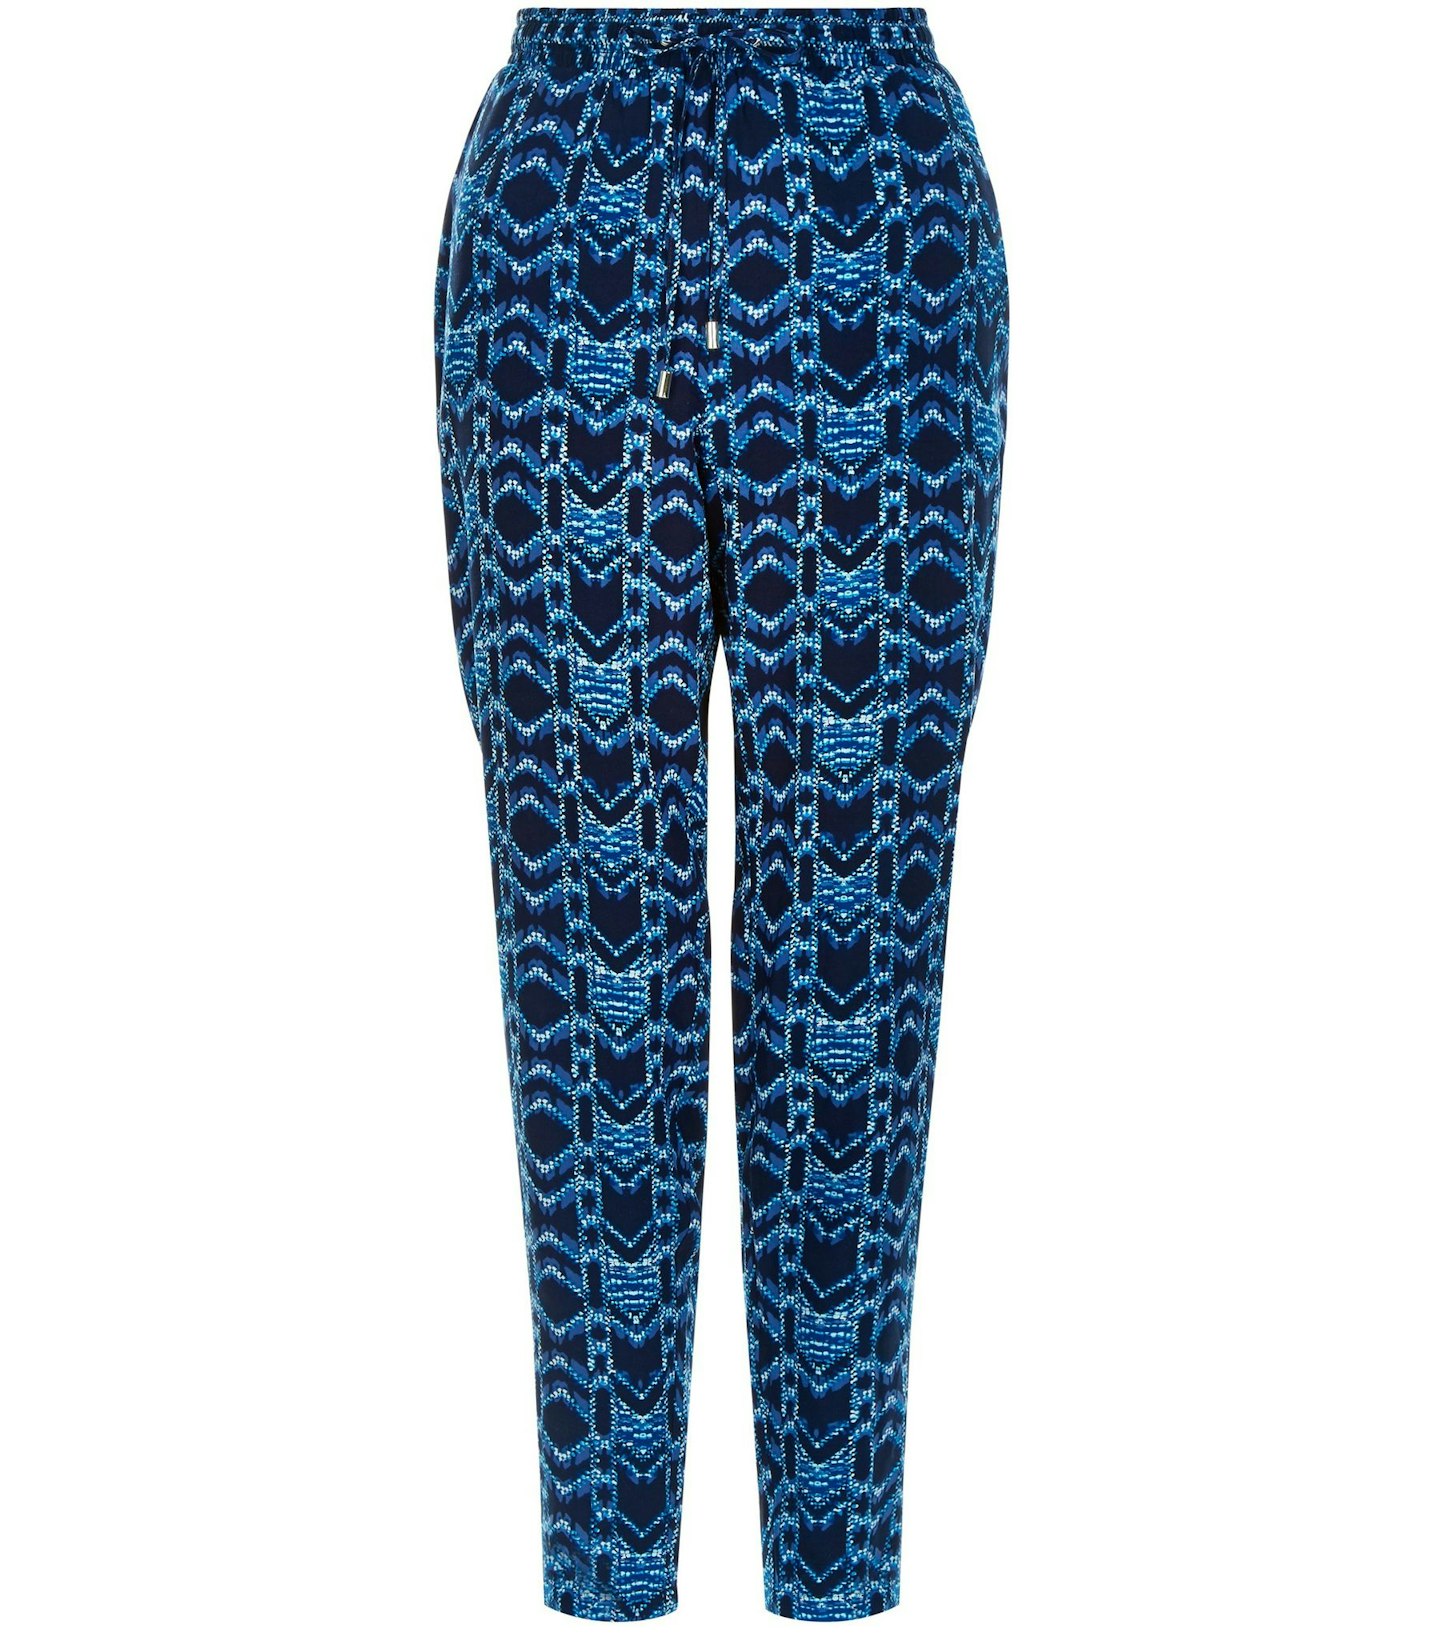 New Look Blue Tie Dye Abstract Print Joggers £17.99